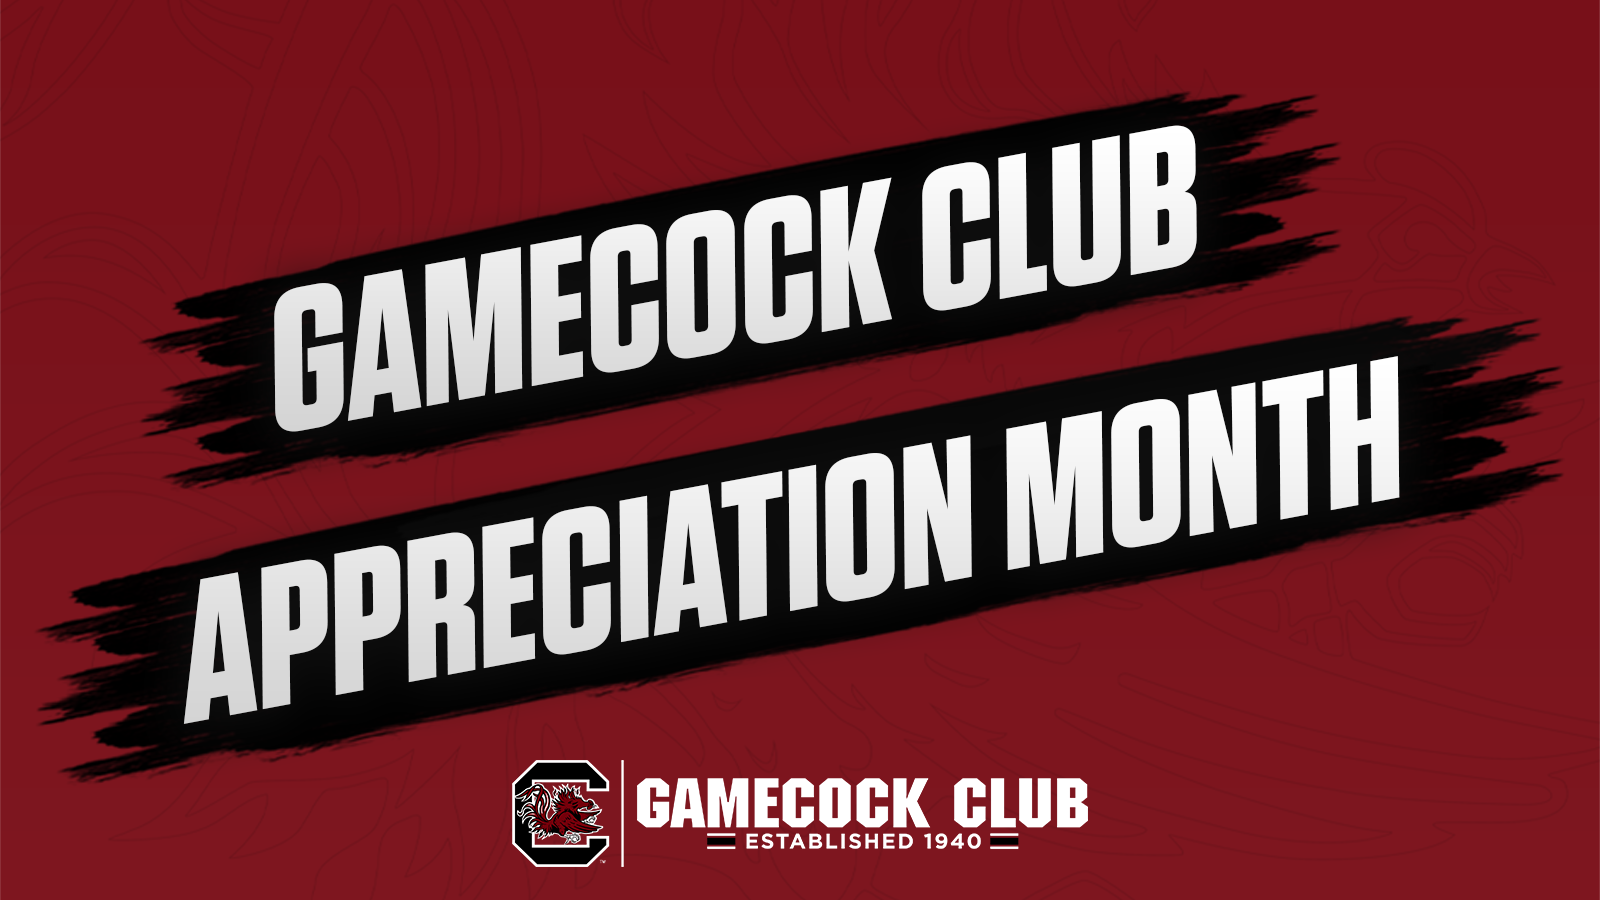 November is Gamecock Club Appreciation Month